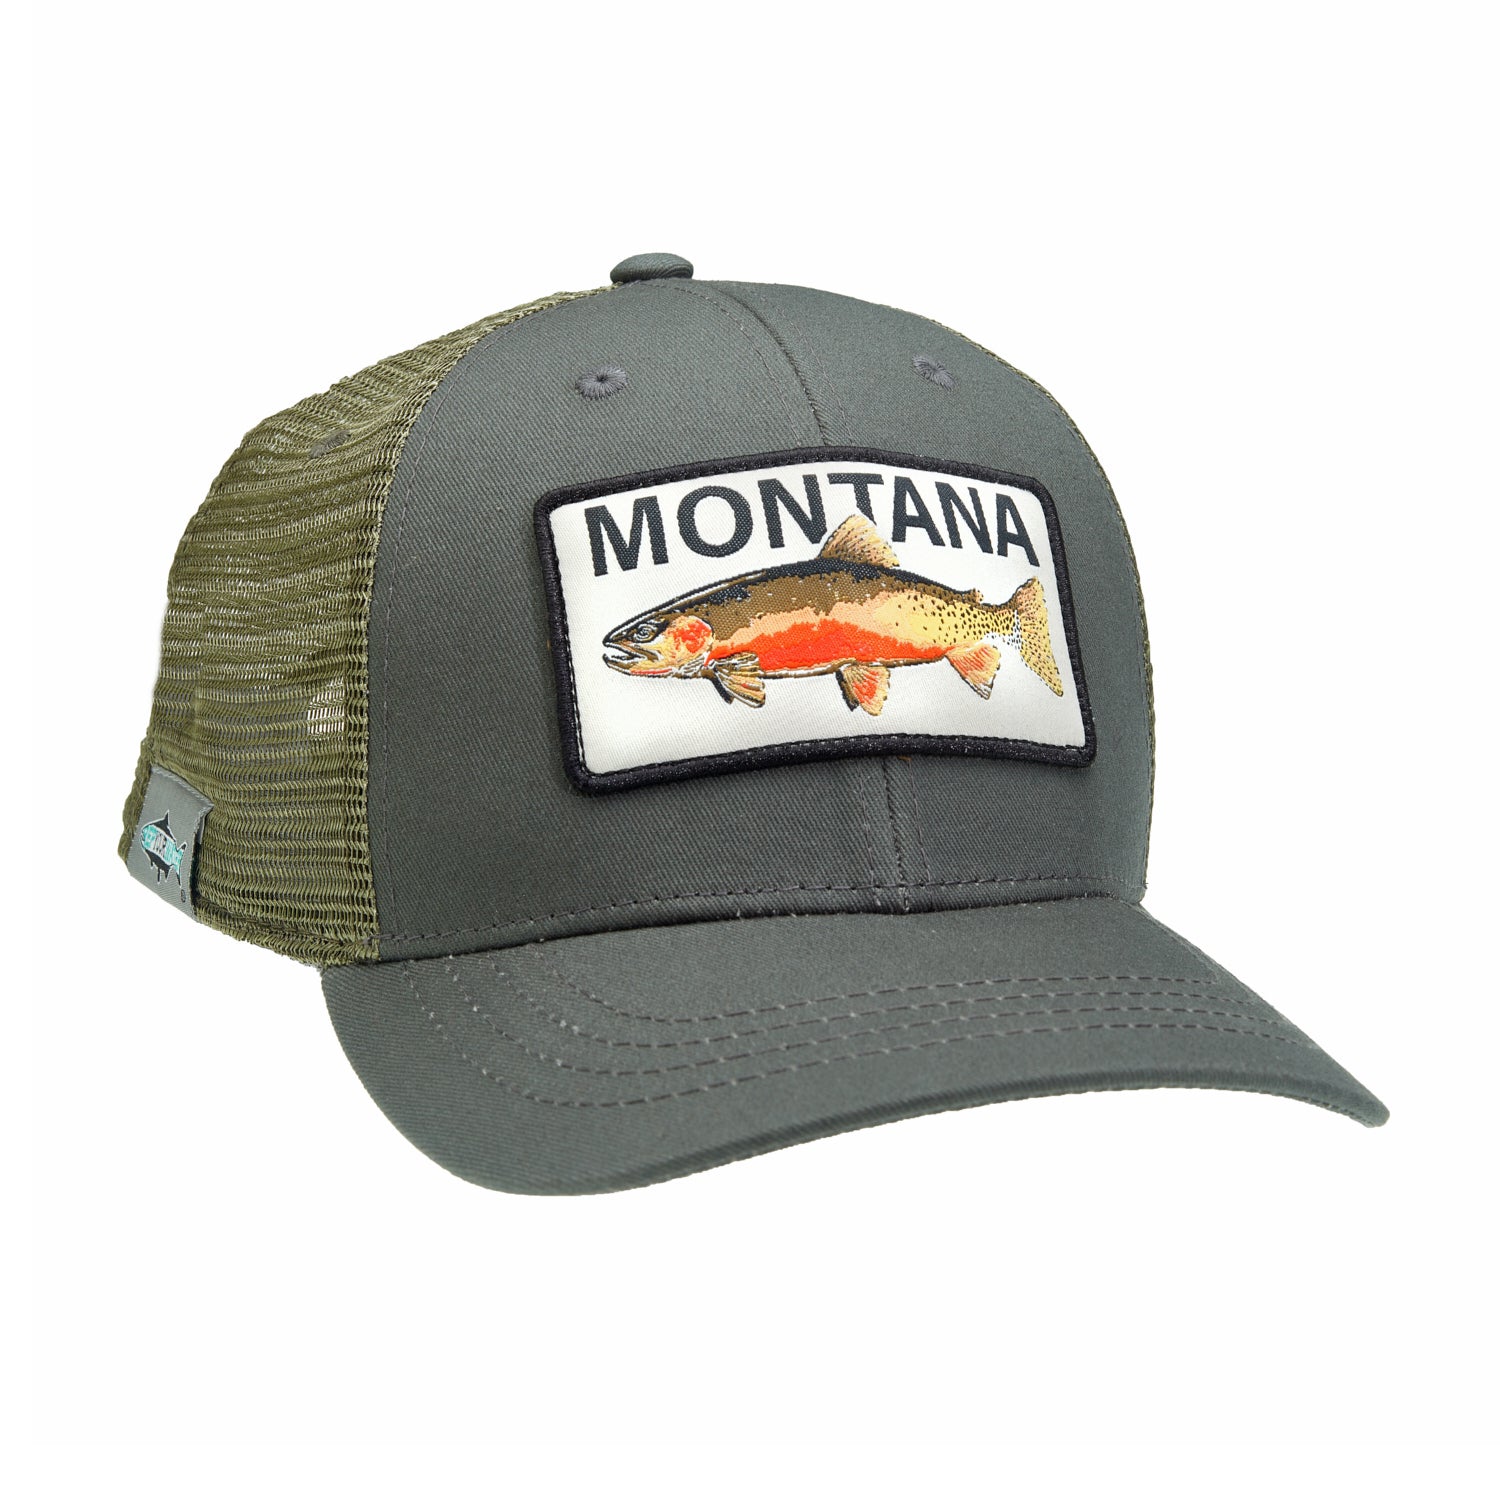 A hat with dull green mesh in the back, dull green cloth in the front and a rectangular patch on the front that has the word "MONTANA" in it and a colorful cutthroat trout.